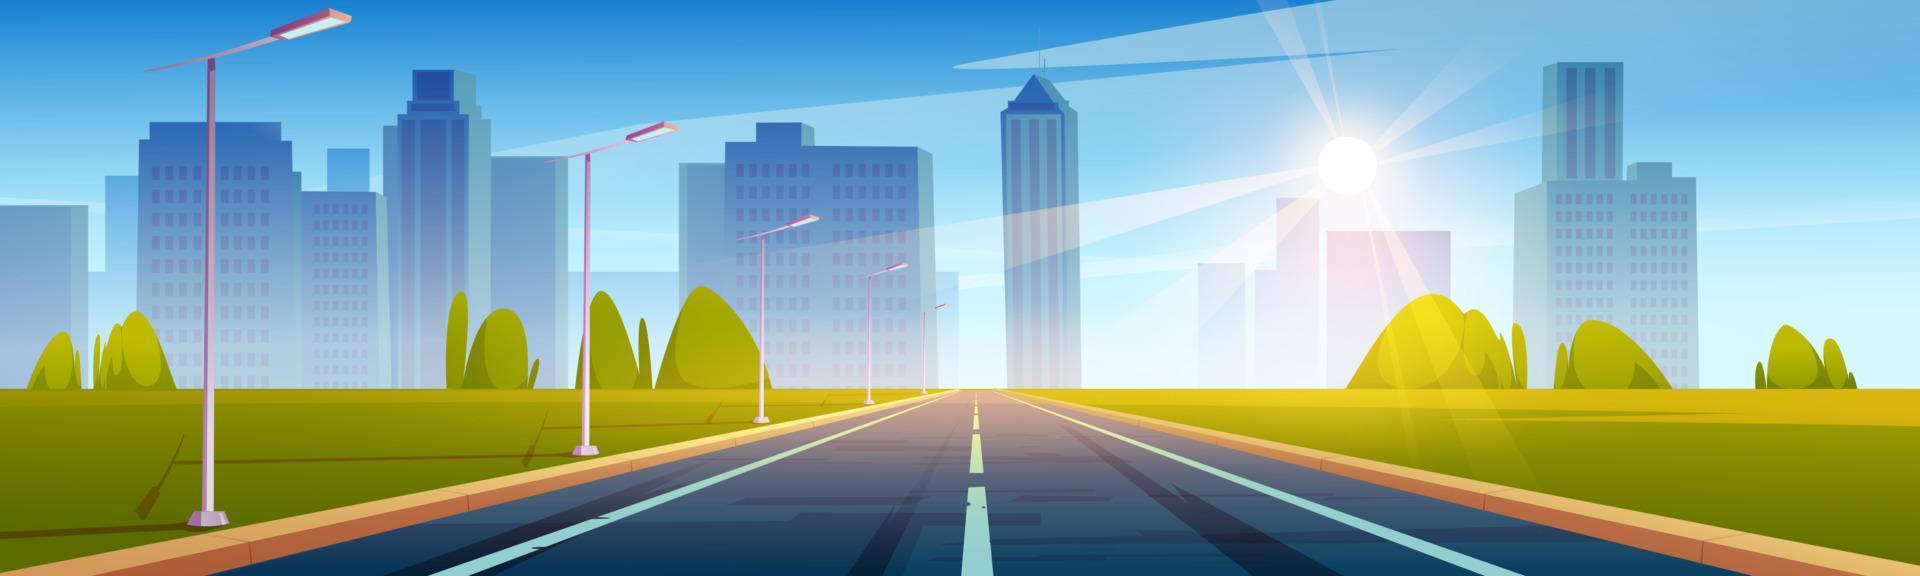 Highway, empty road to city with high skyscrapers vector